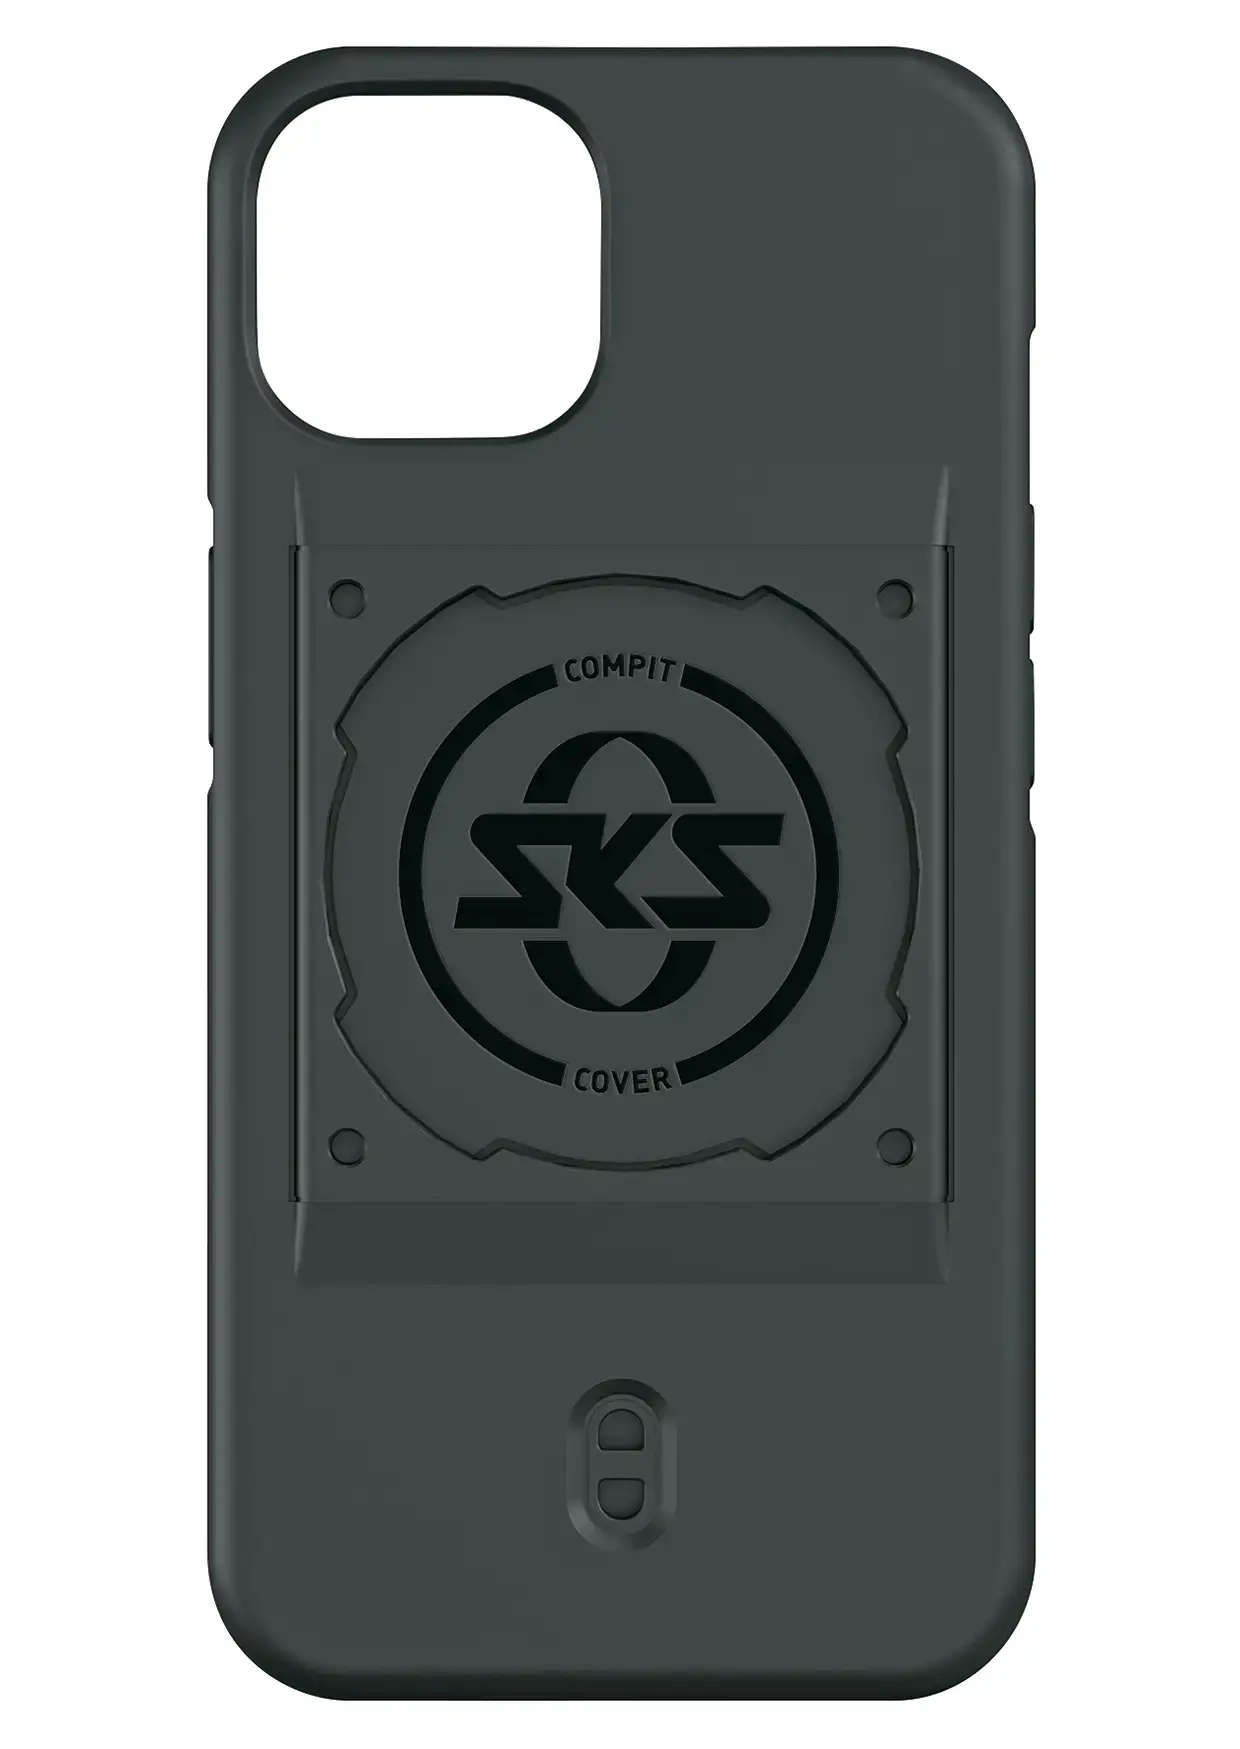 SKS Compit Cover iPhone 14